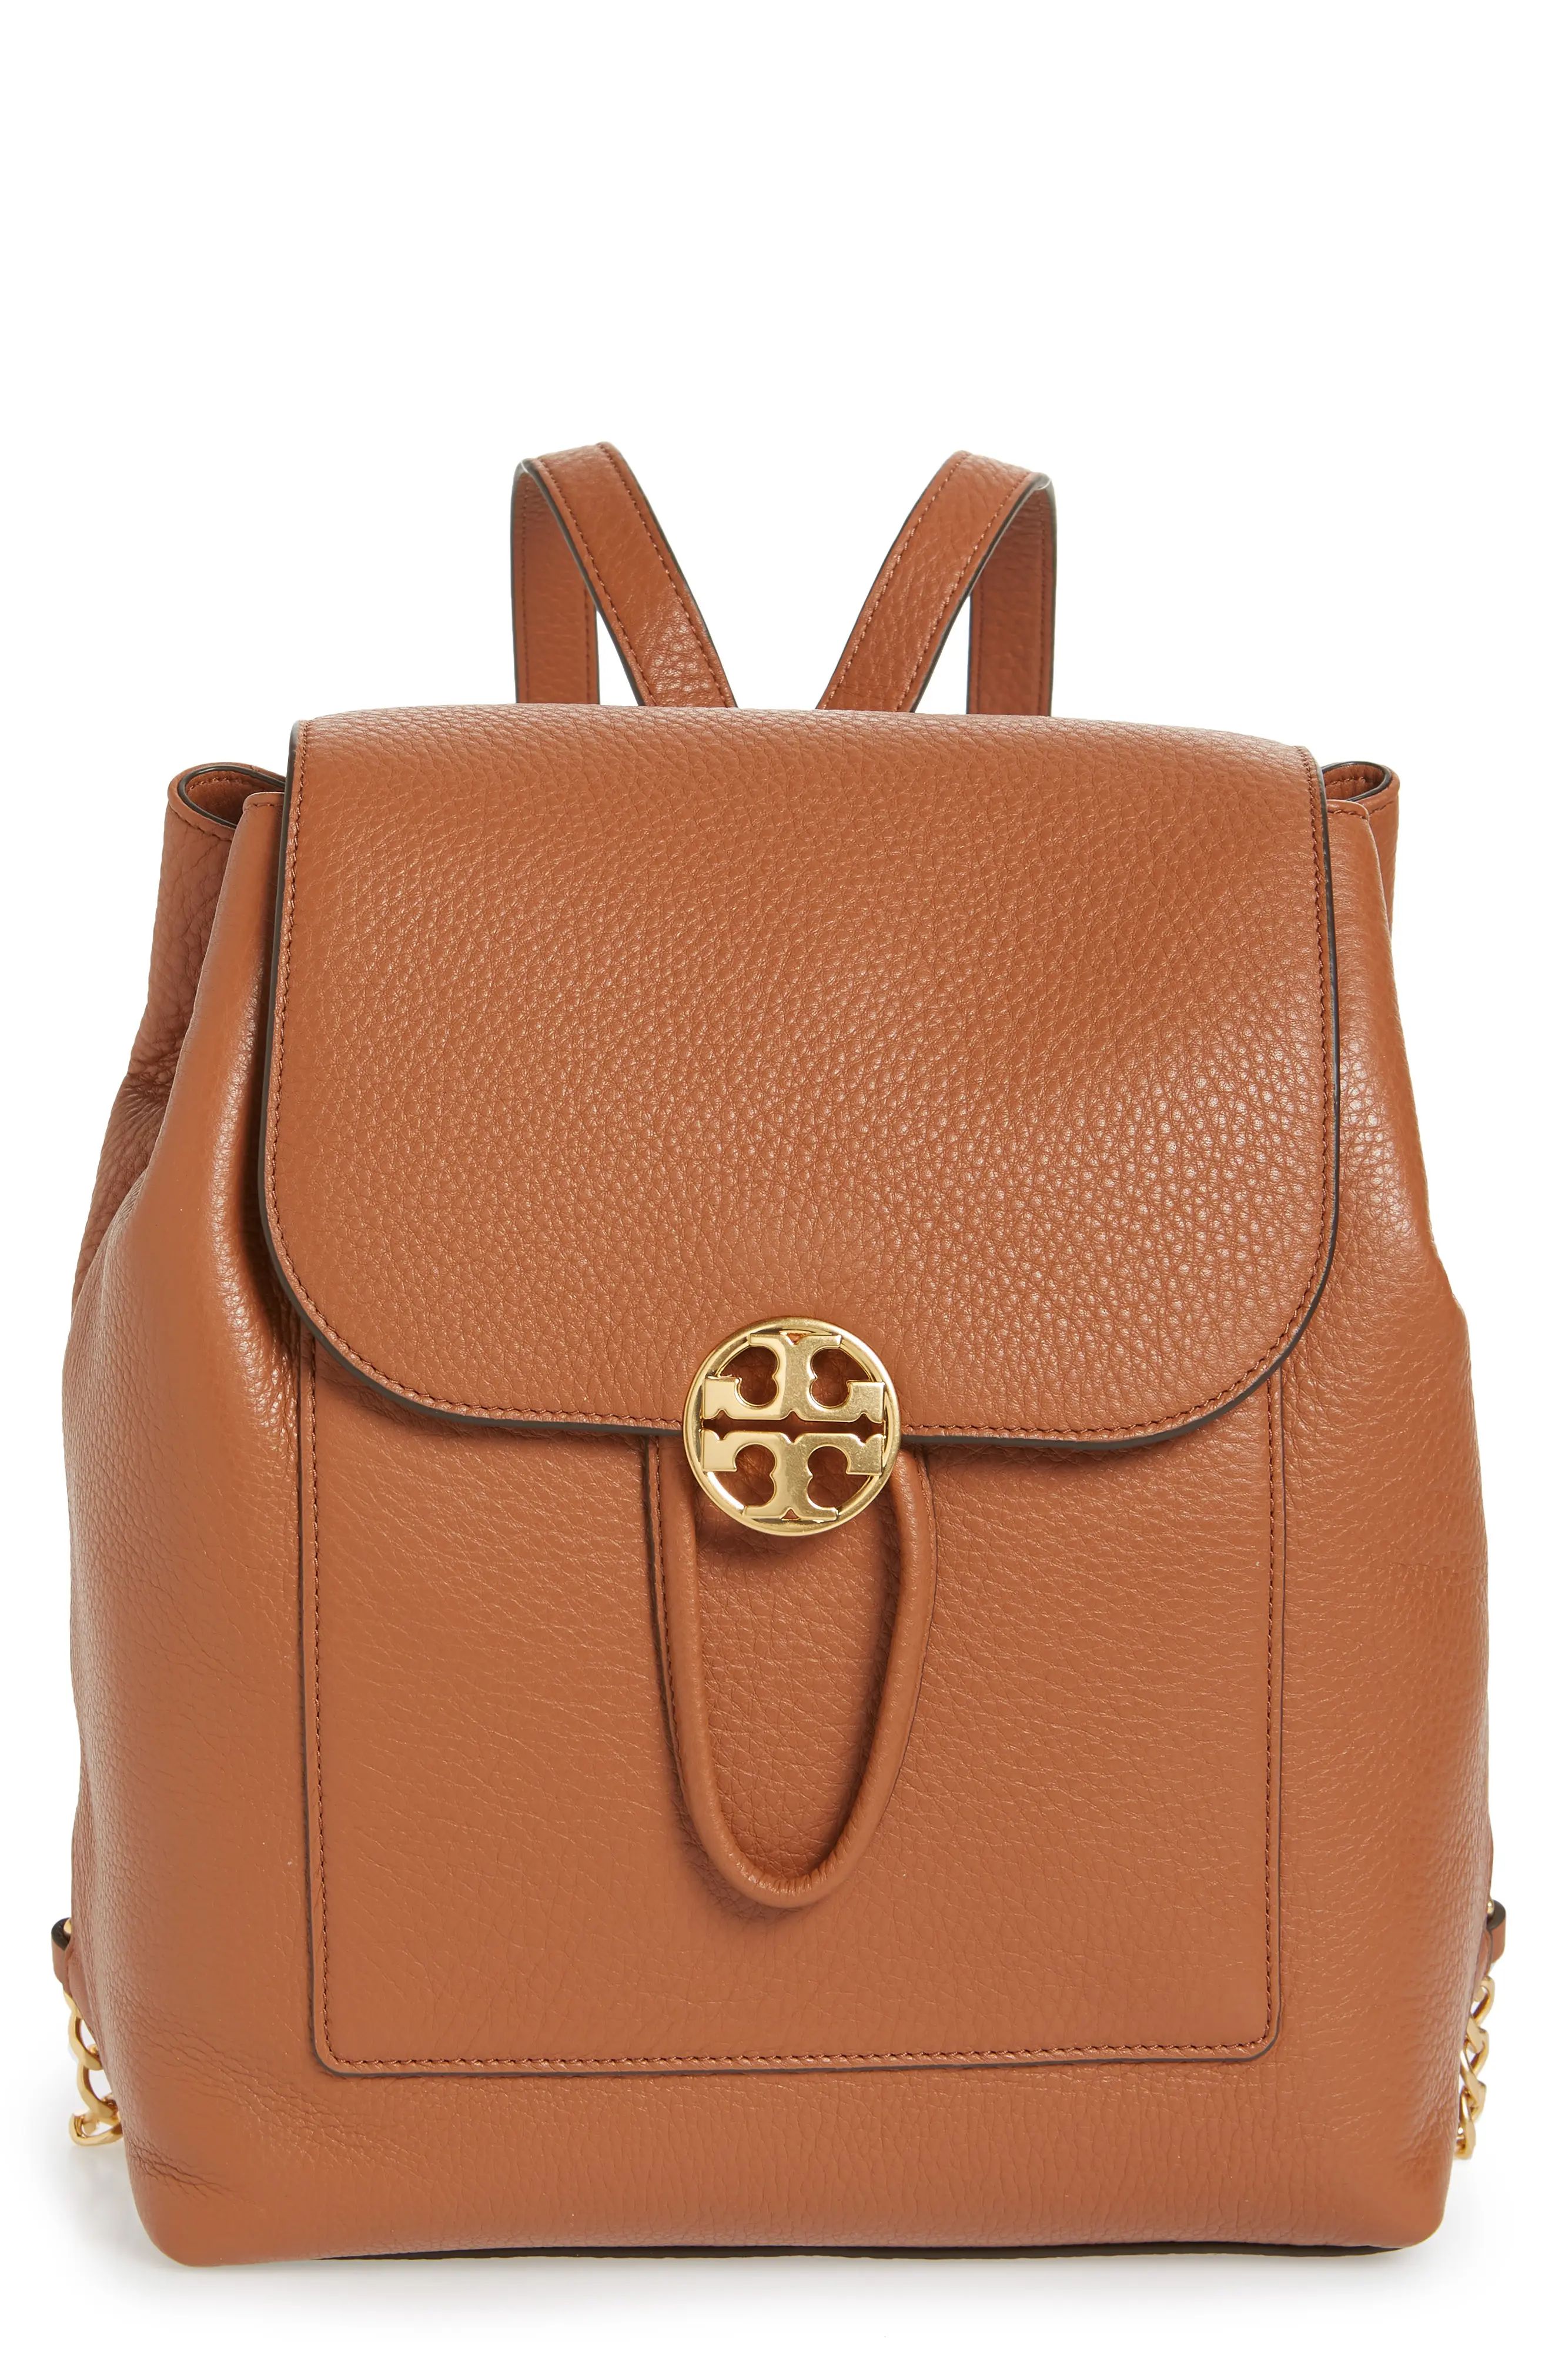 Tory Burch Chelsea Leather Backpack | Nordstrom